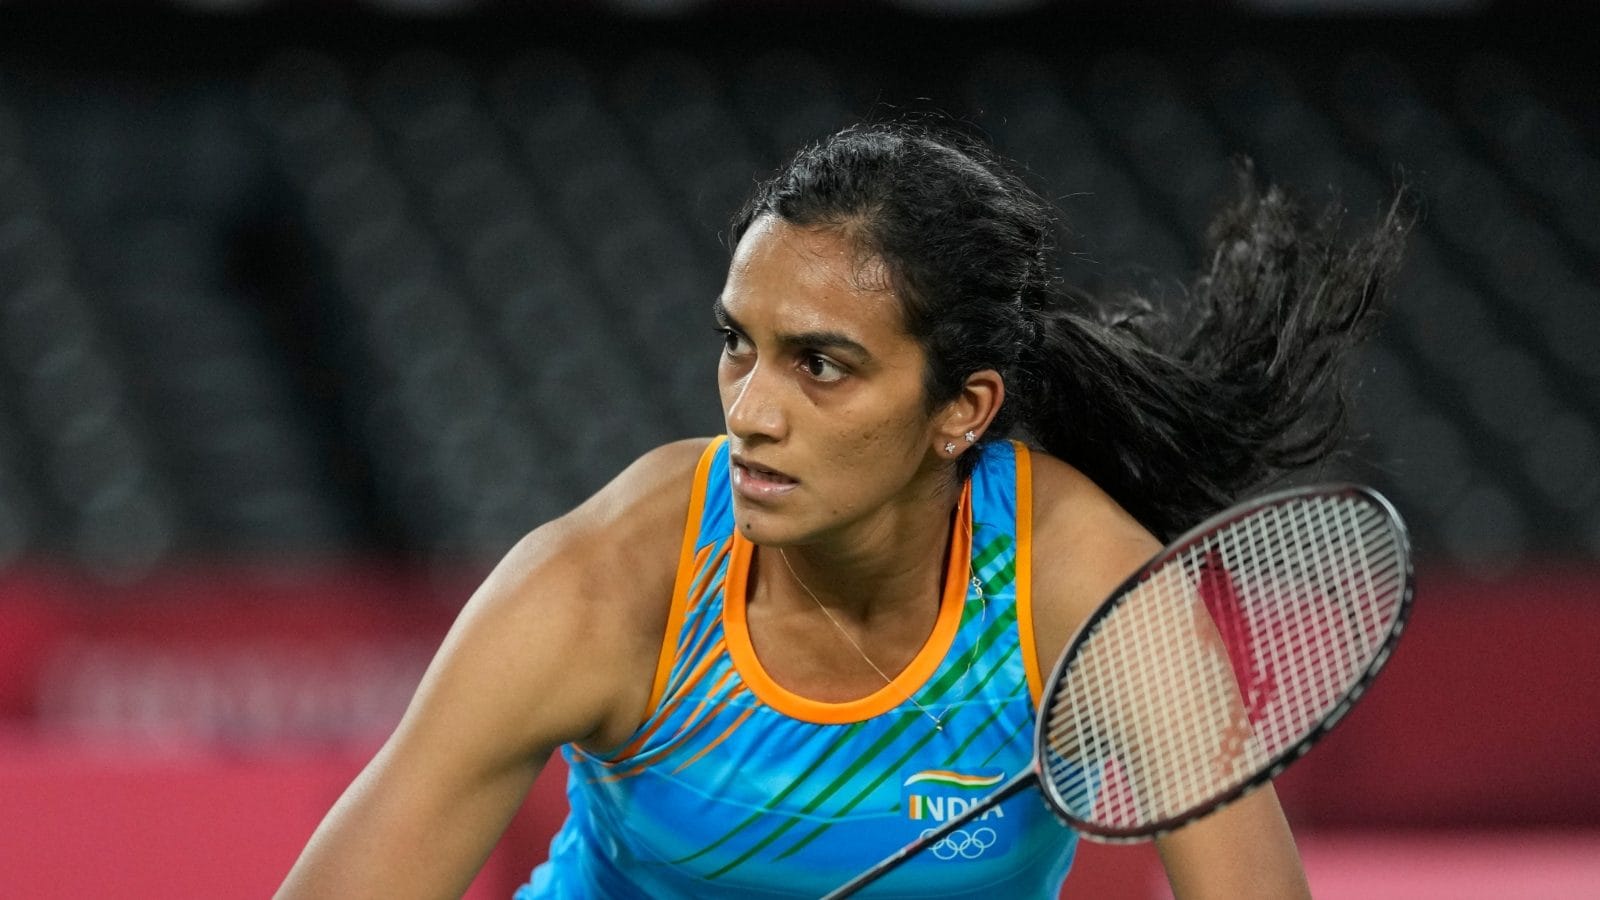 Denmark Open PV Sindhu Loses in Quarters to Koreas An Seyoung in Straight Games